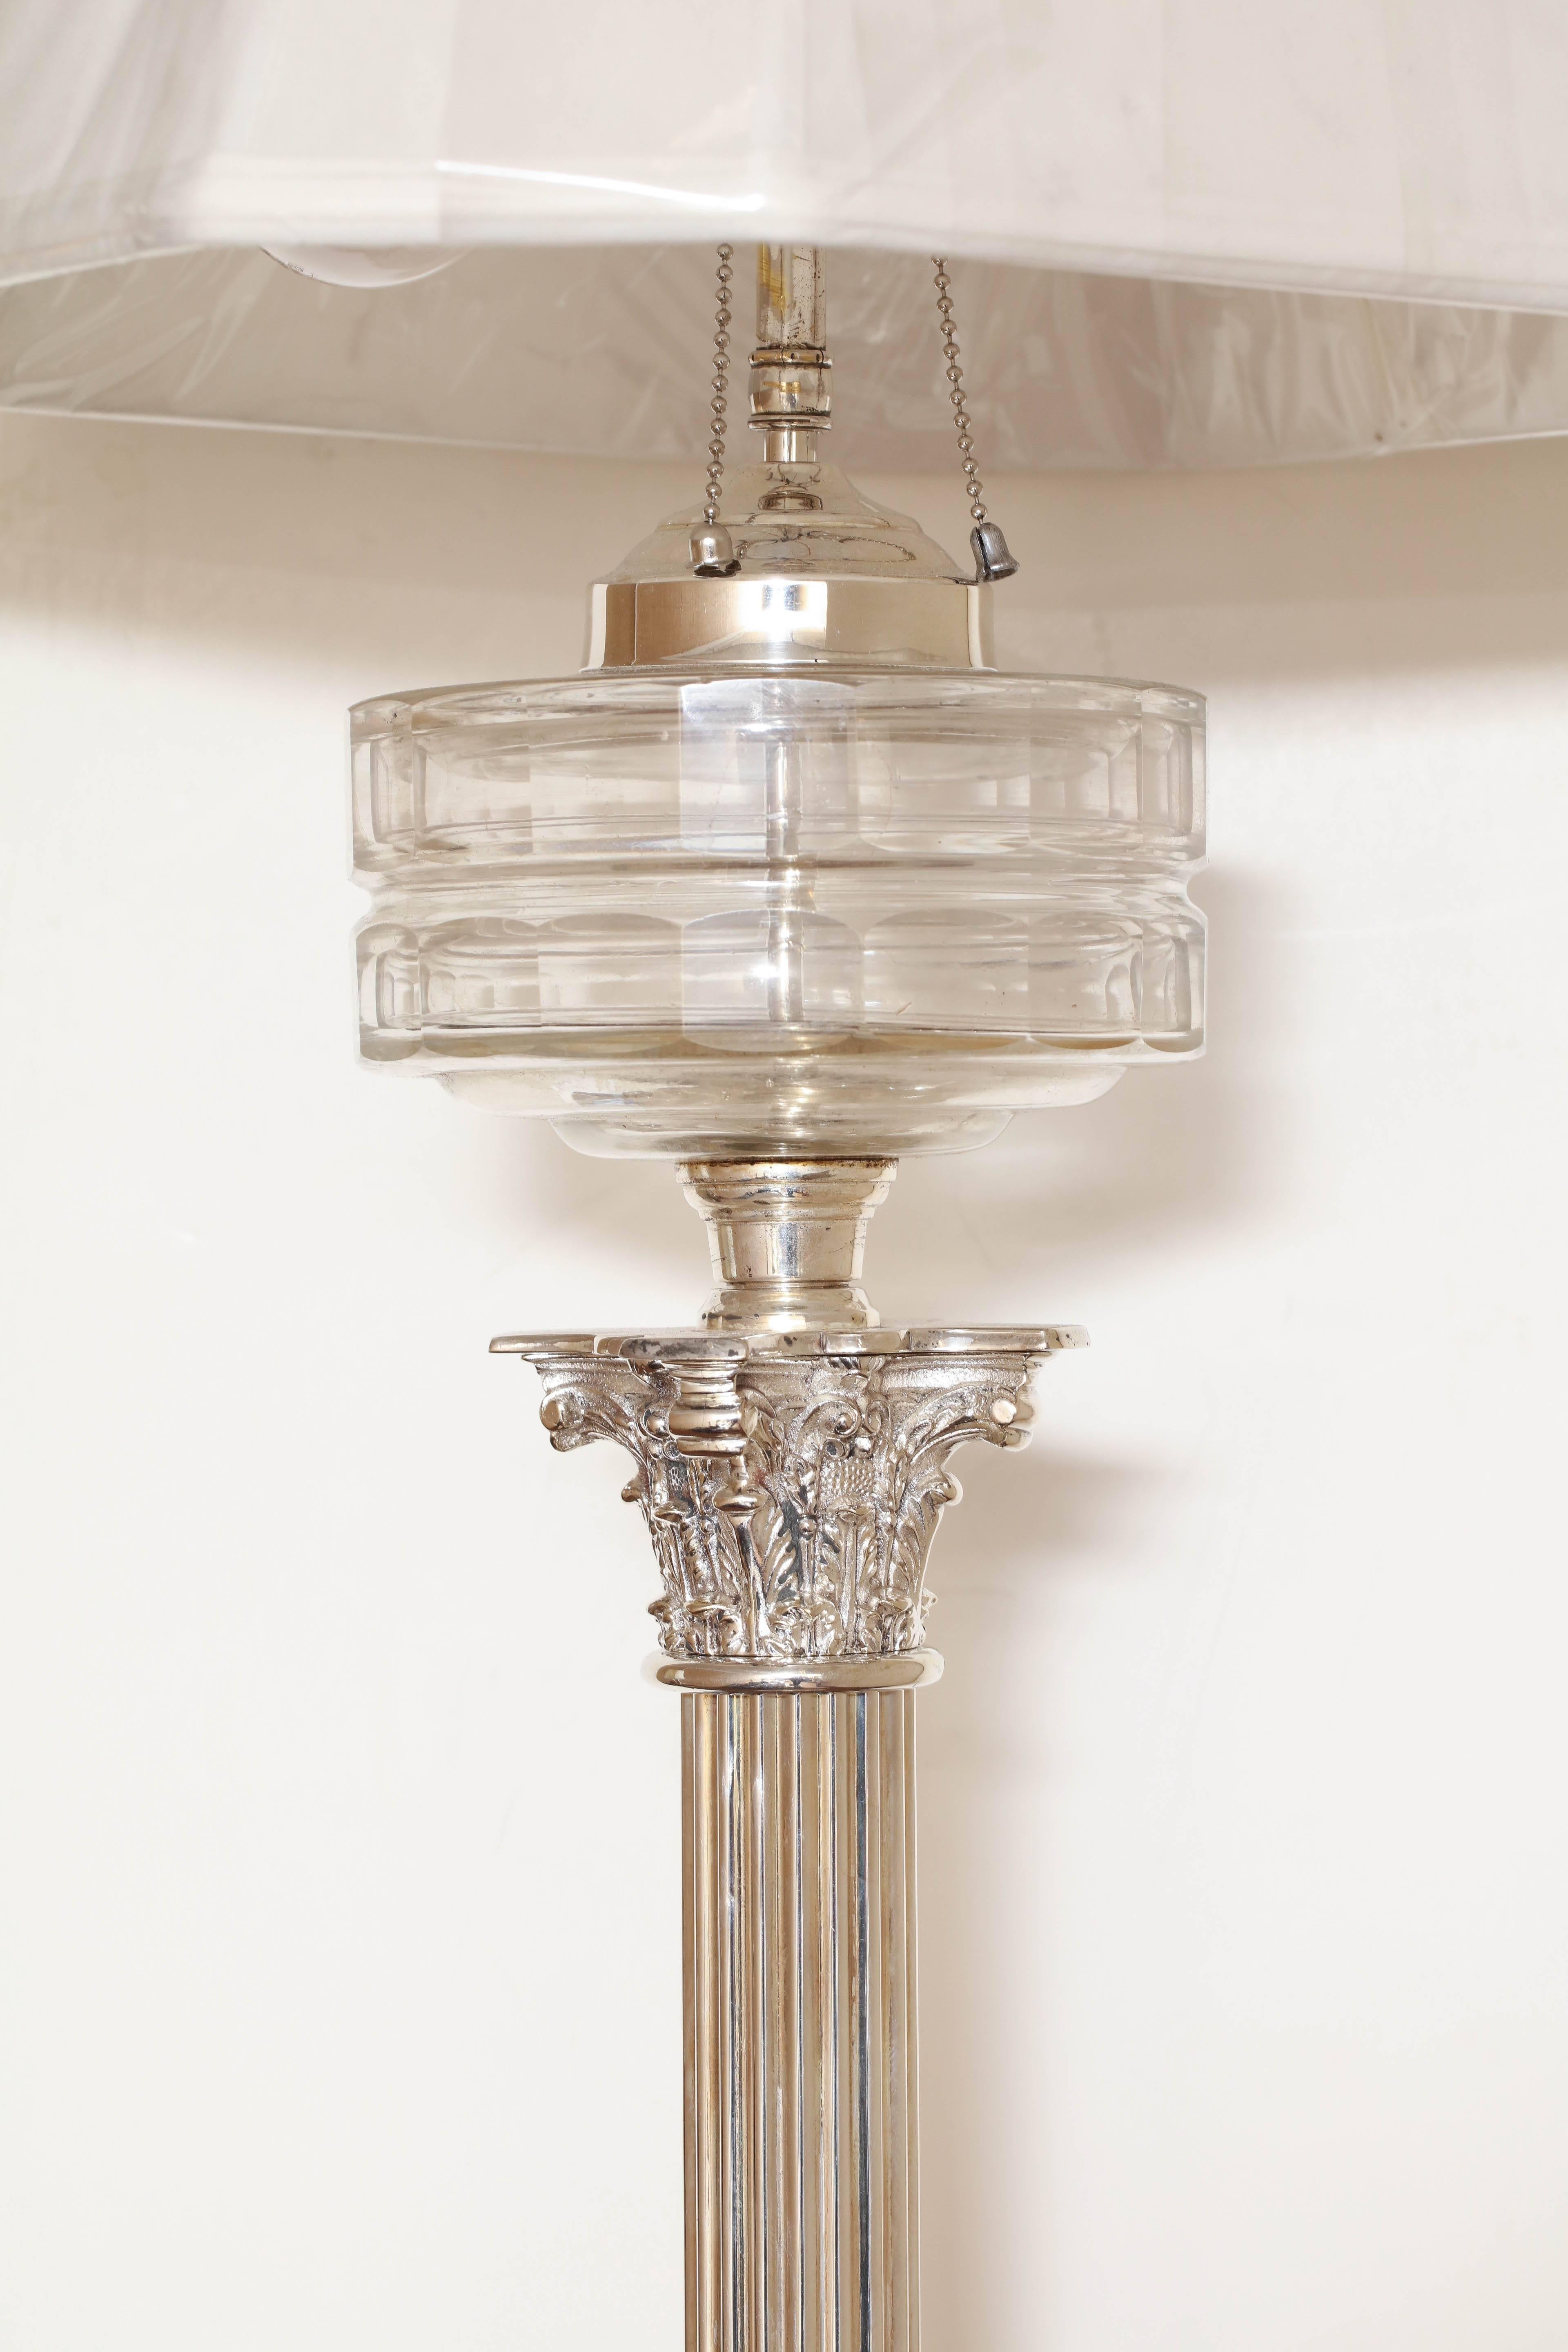 English Tall Neoclassical Electrified Silver Plated Column-Form Oil Lamp For Sale